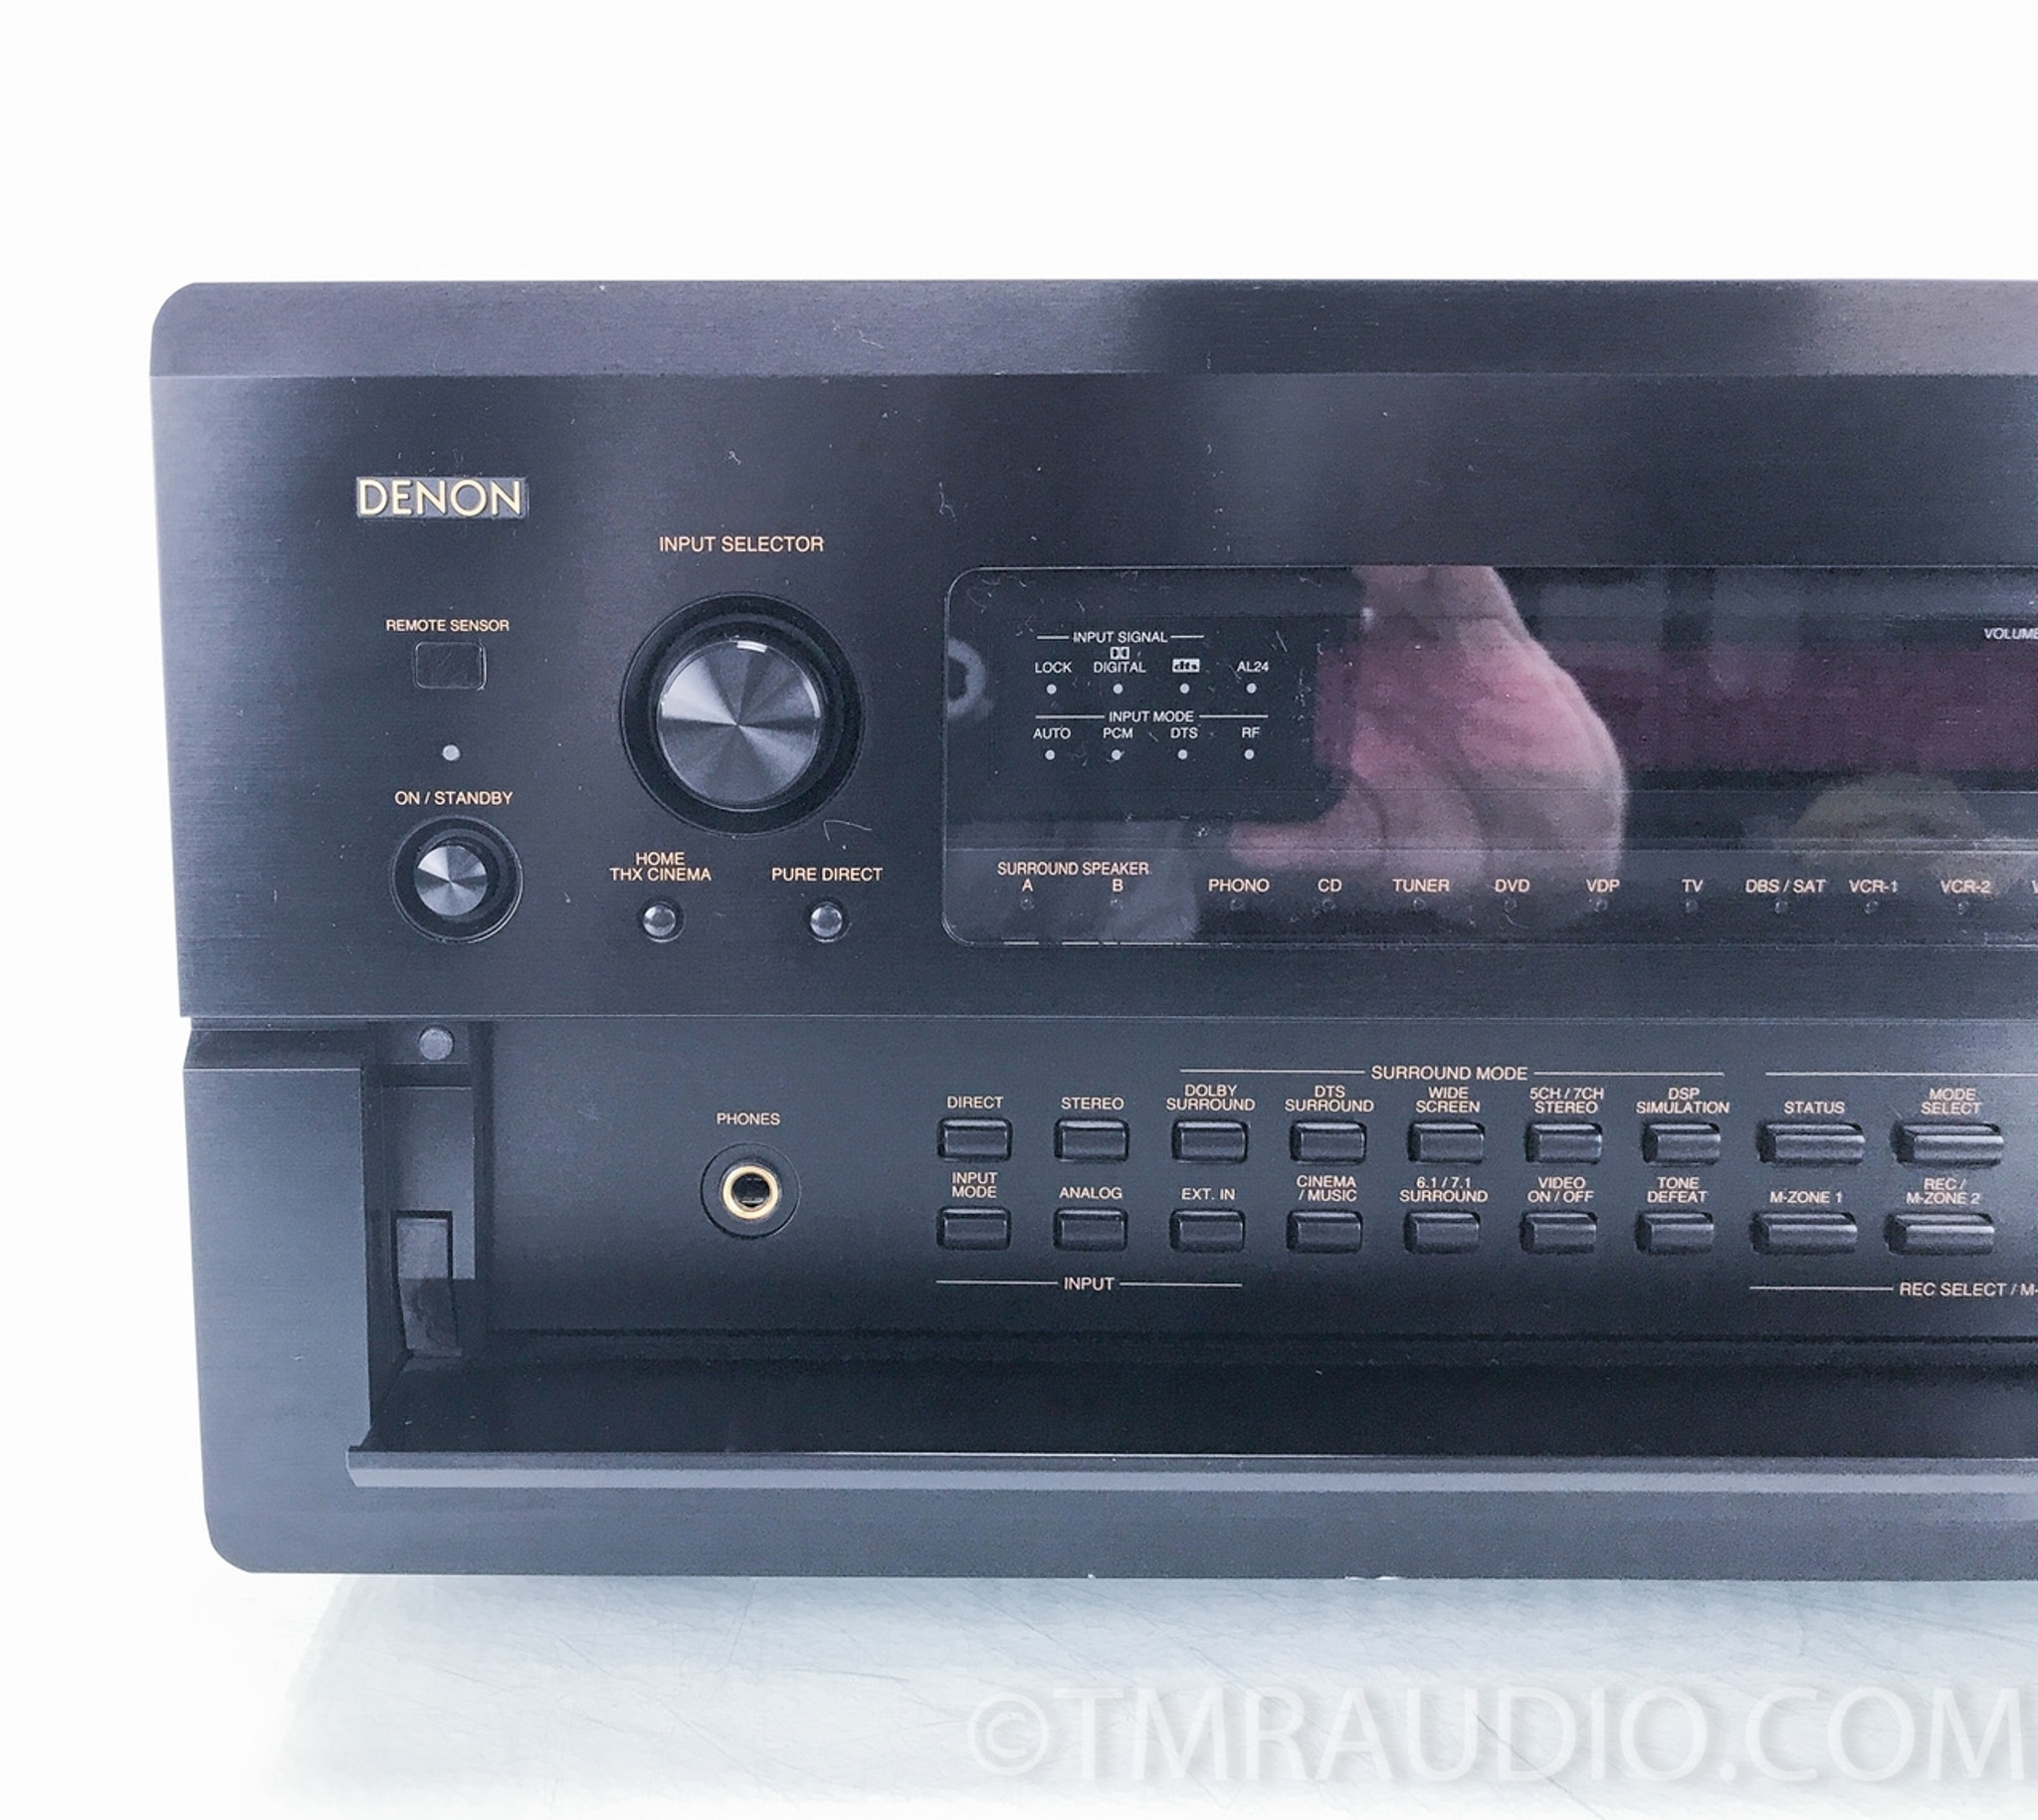 Denon AVR-5803 Home Theater Receiver Review